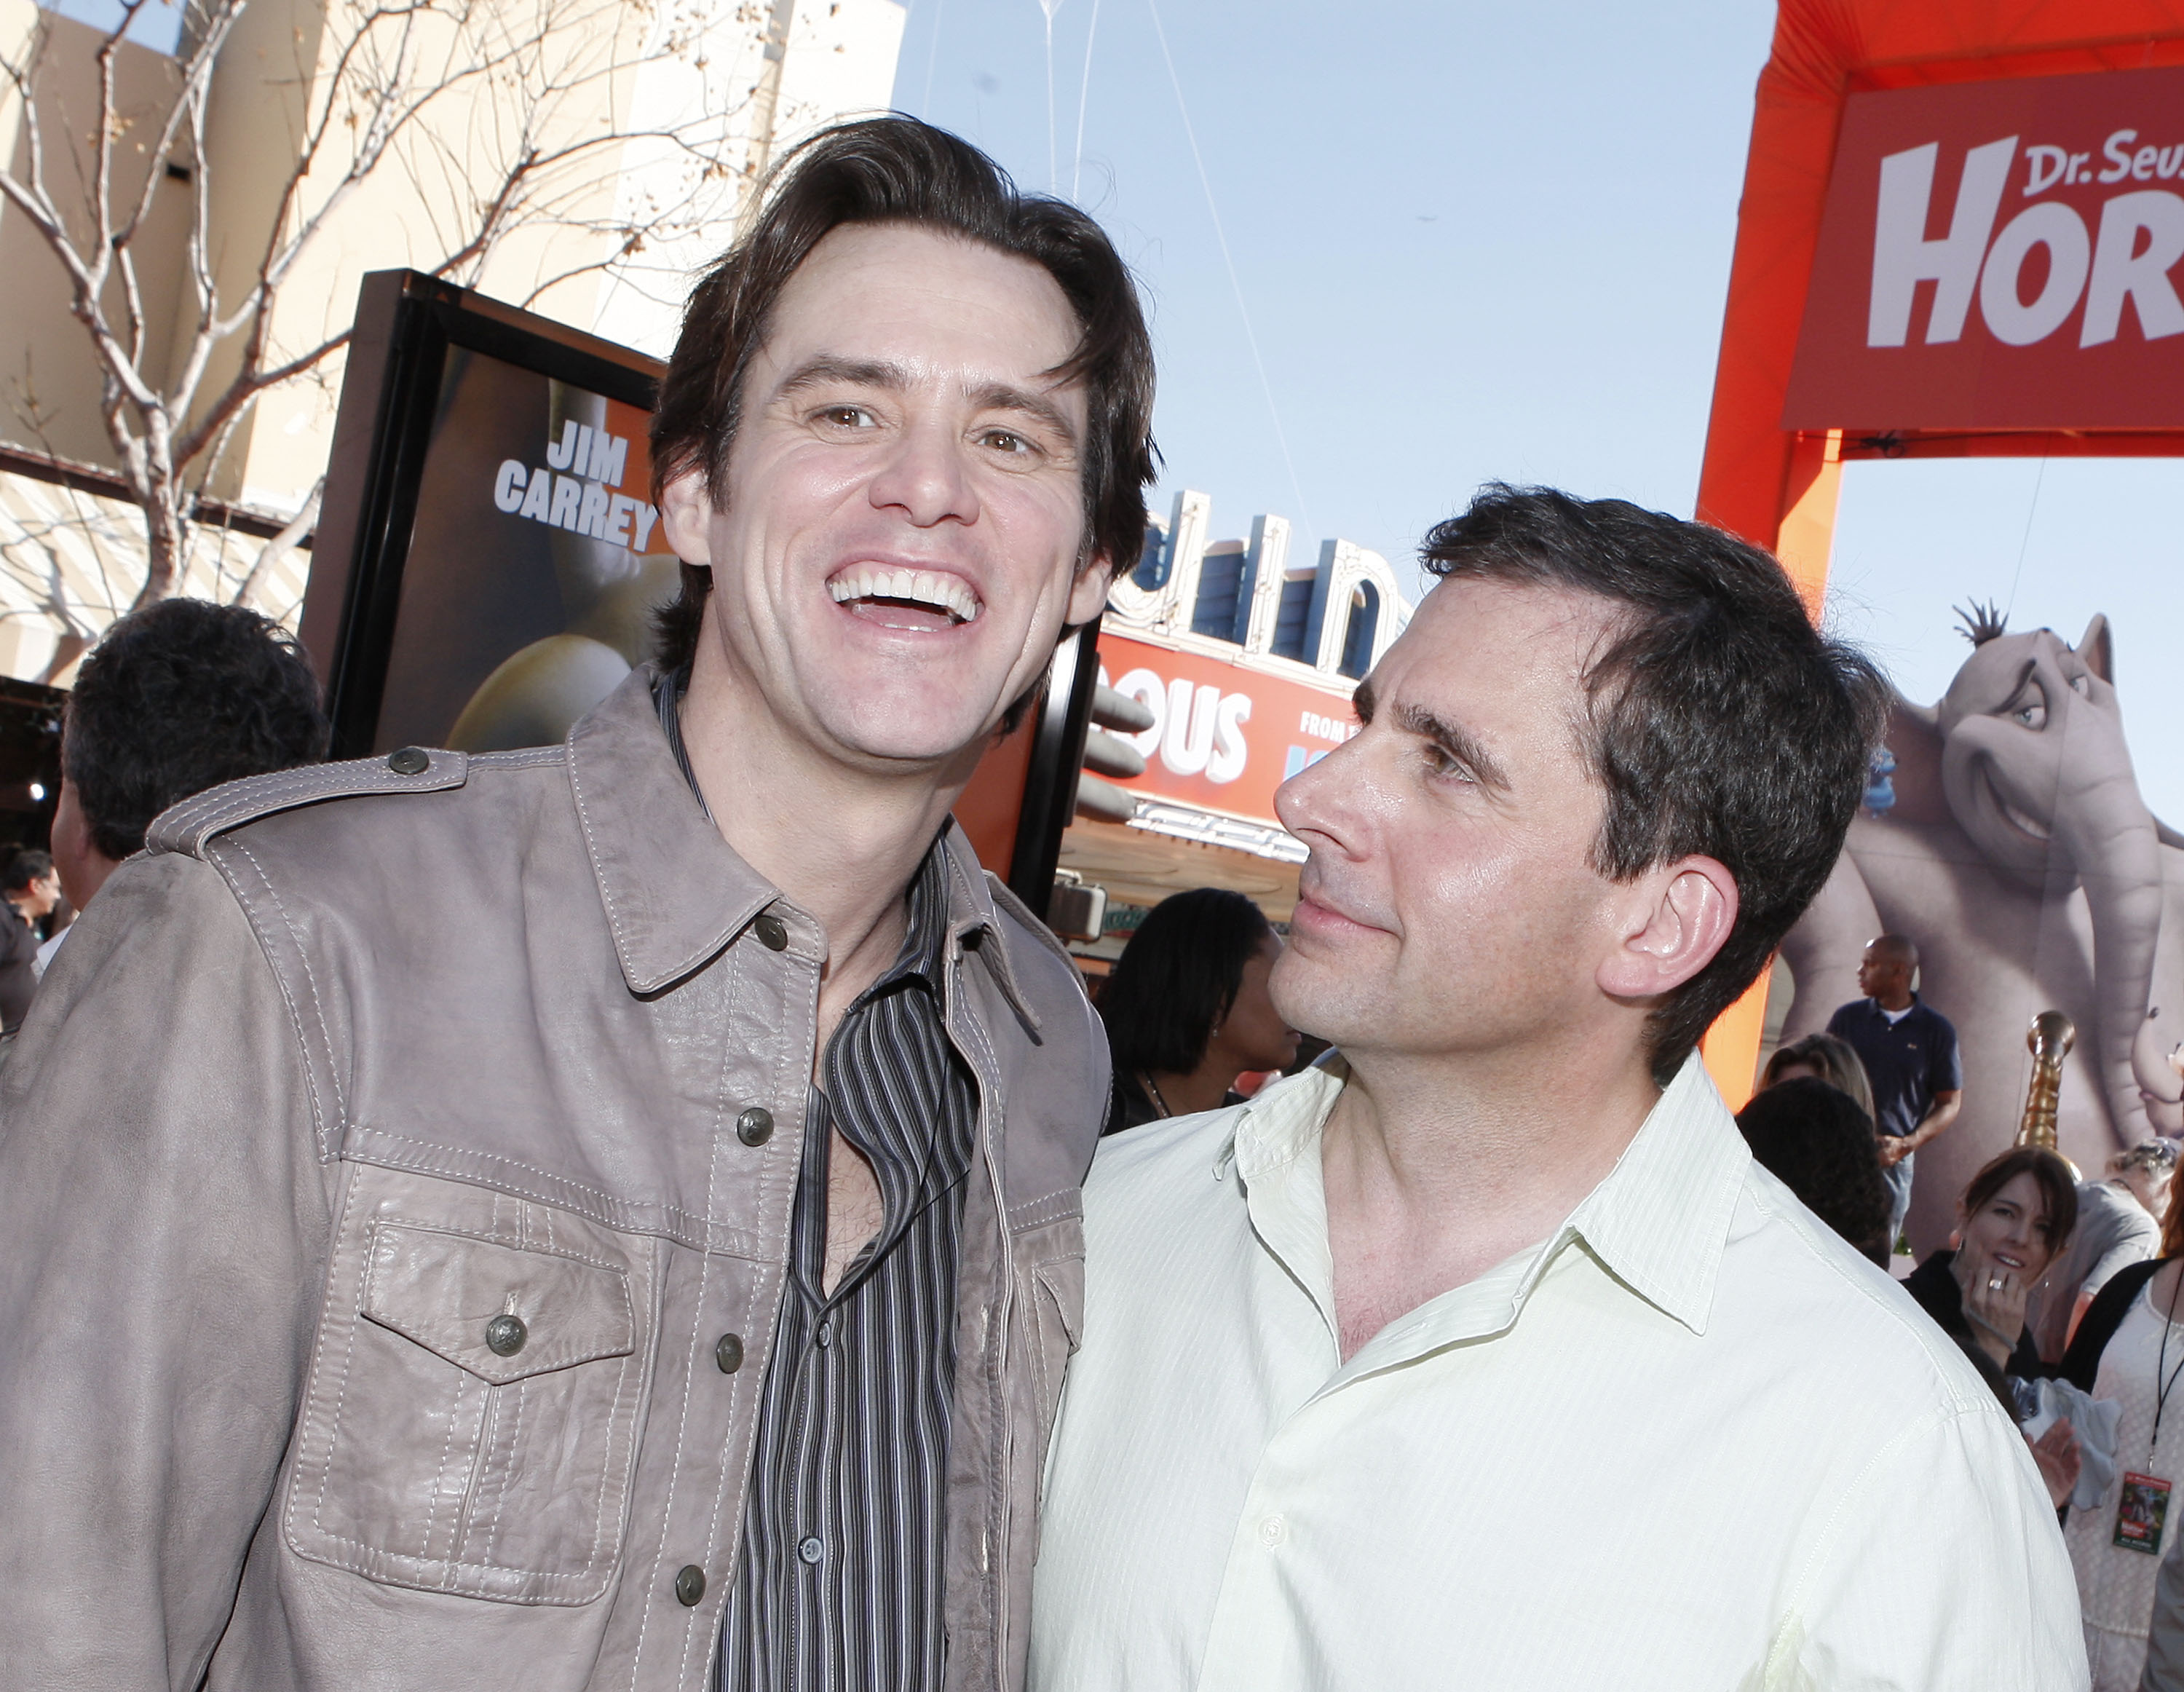 Jim Carrey and Steve Carell, from Bruce Almighty, attend the premiere of their movie, Horton Hears a Who!